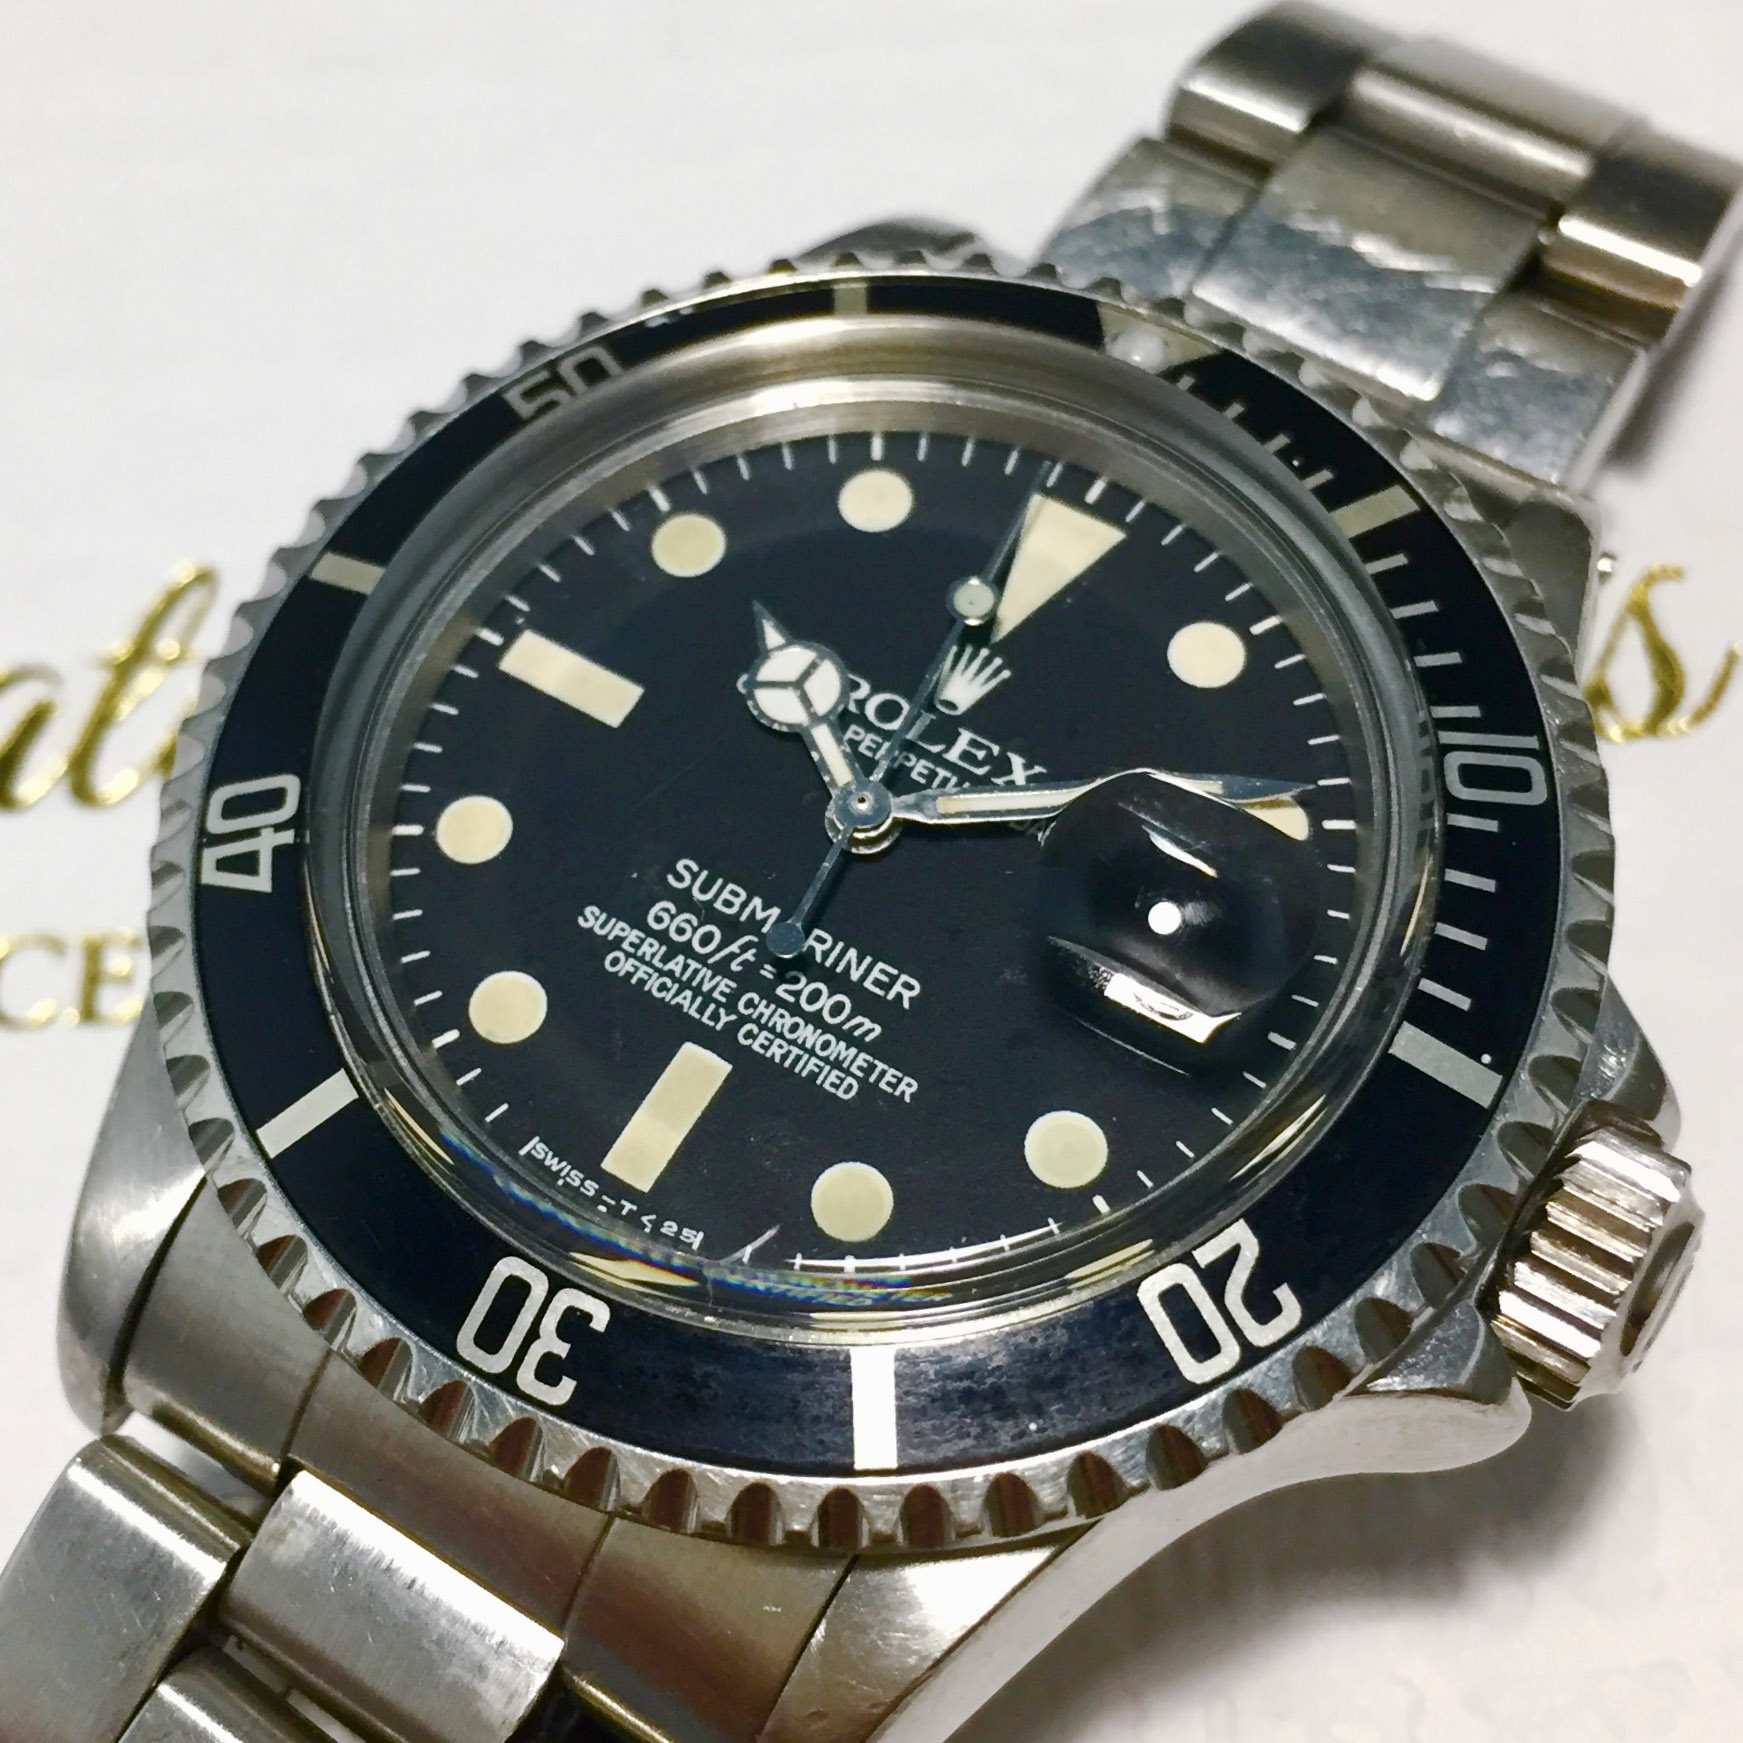 Why Your Rolex Watch Does Not Glow in the Dark Anymore | The Watch Buyers Group